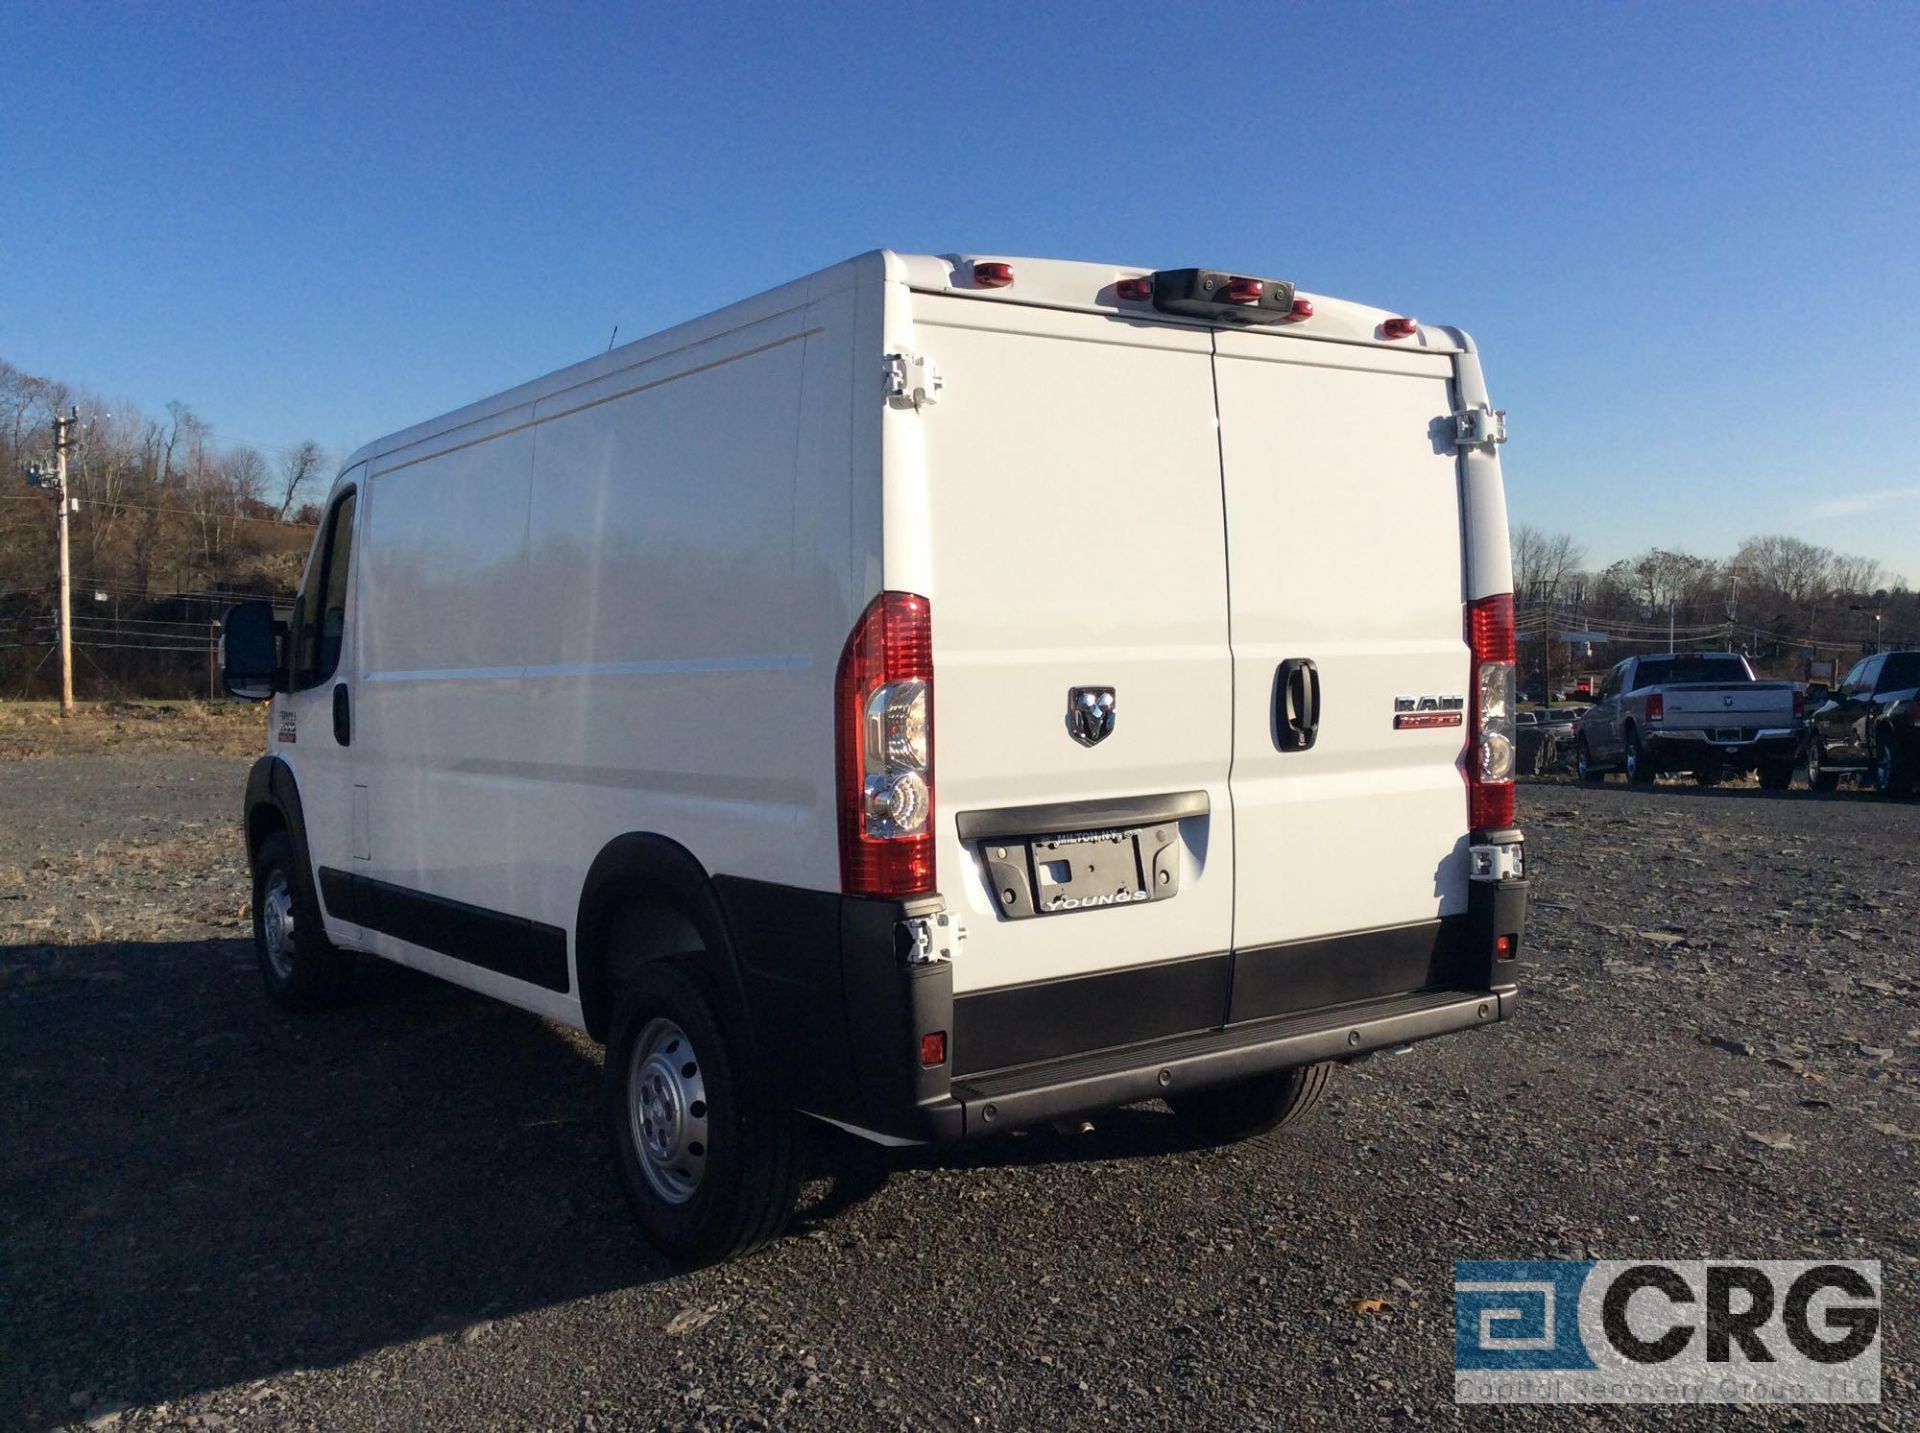 2019 Ram 1500 PROMASTER CARGO VAN 136” WB LOW ROOF, AT, 3.6 liter V-6 engine, keyless entry, power - Image 4 of 13